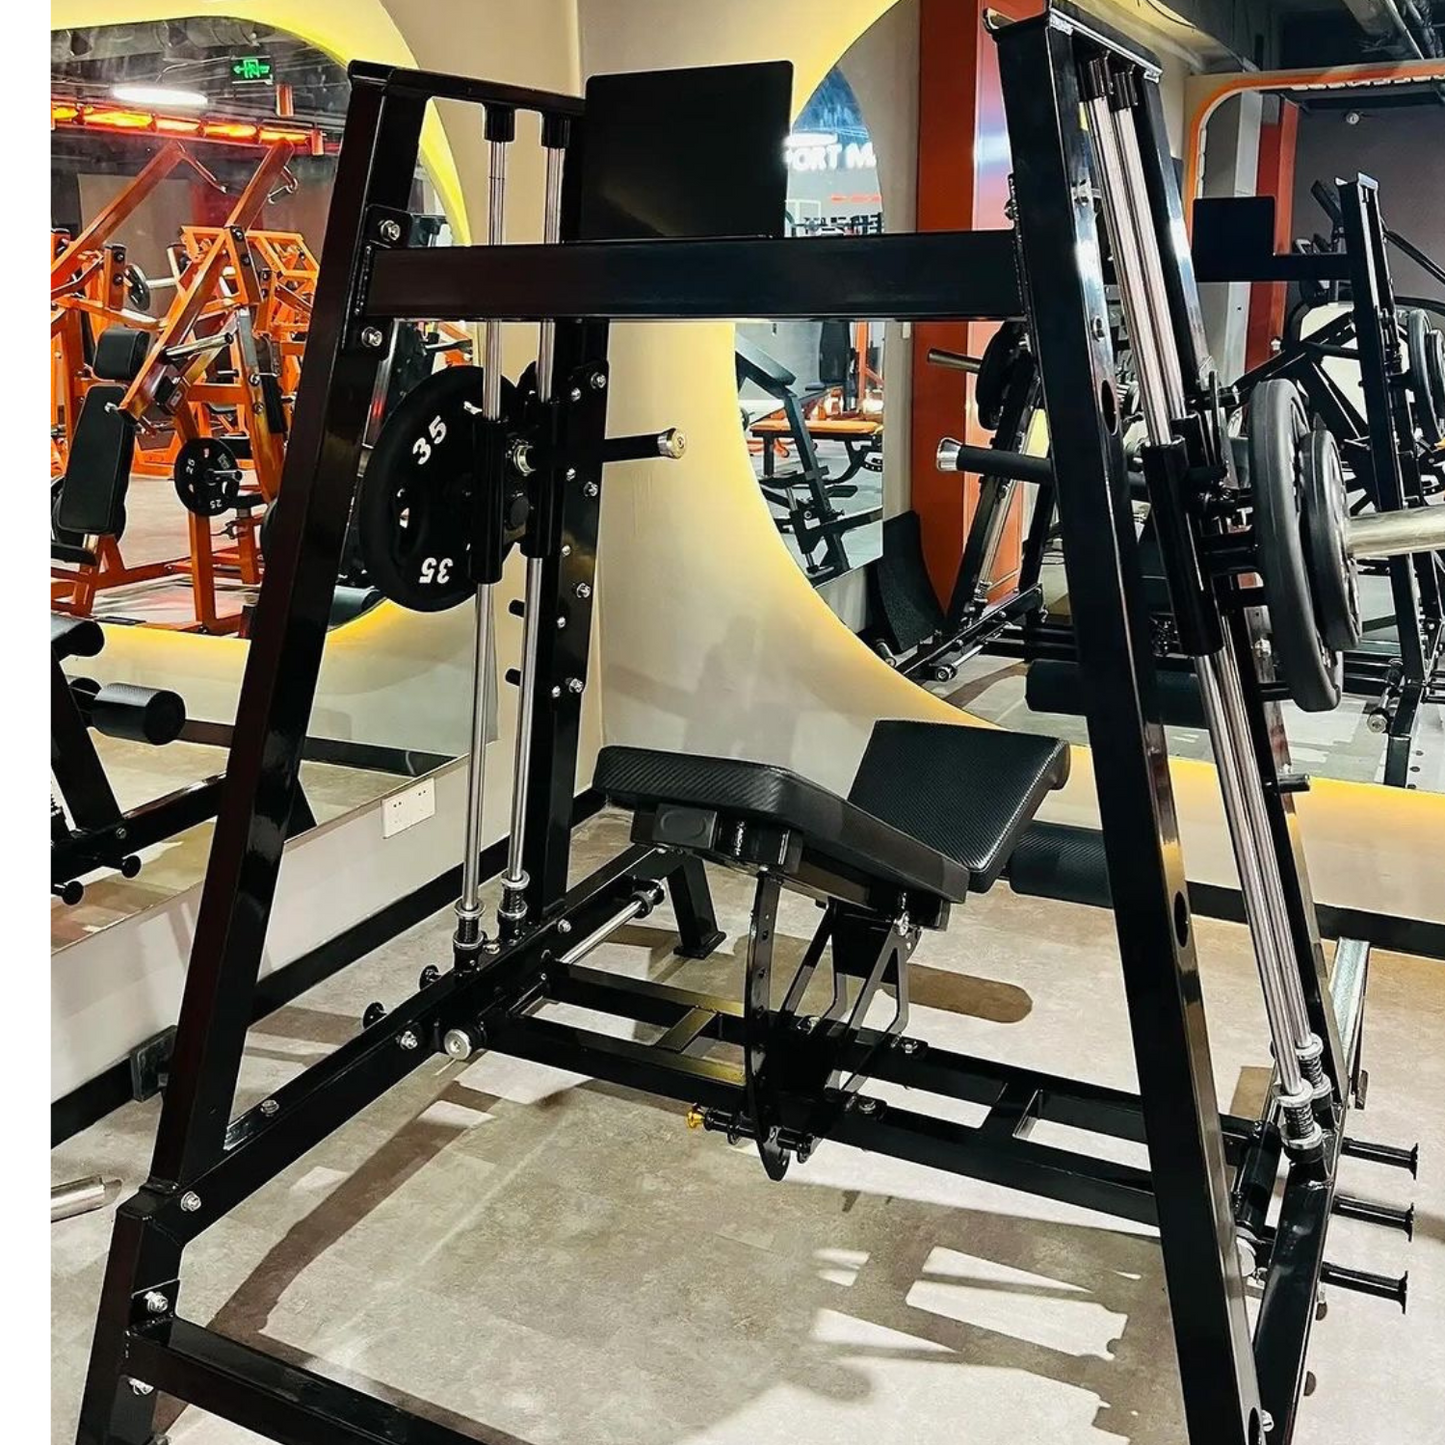 Realleader USA XRHSPRO1008 Commercial Power Smith Machine Dual System Incline Bench